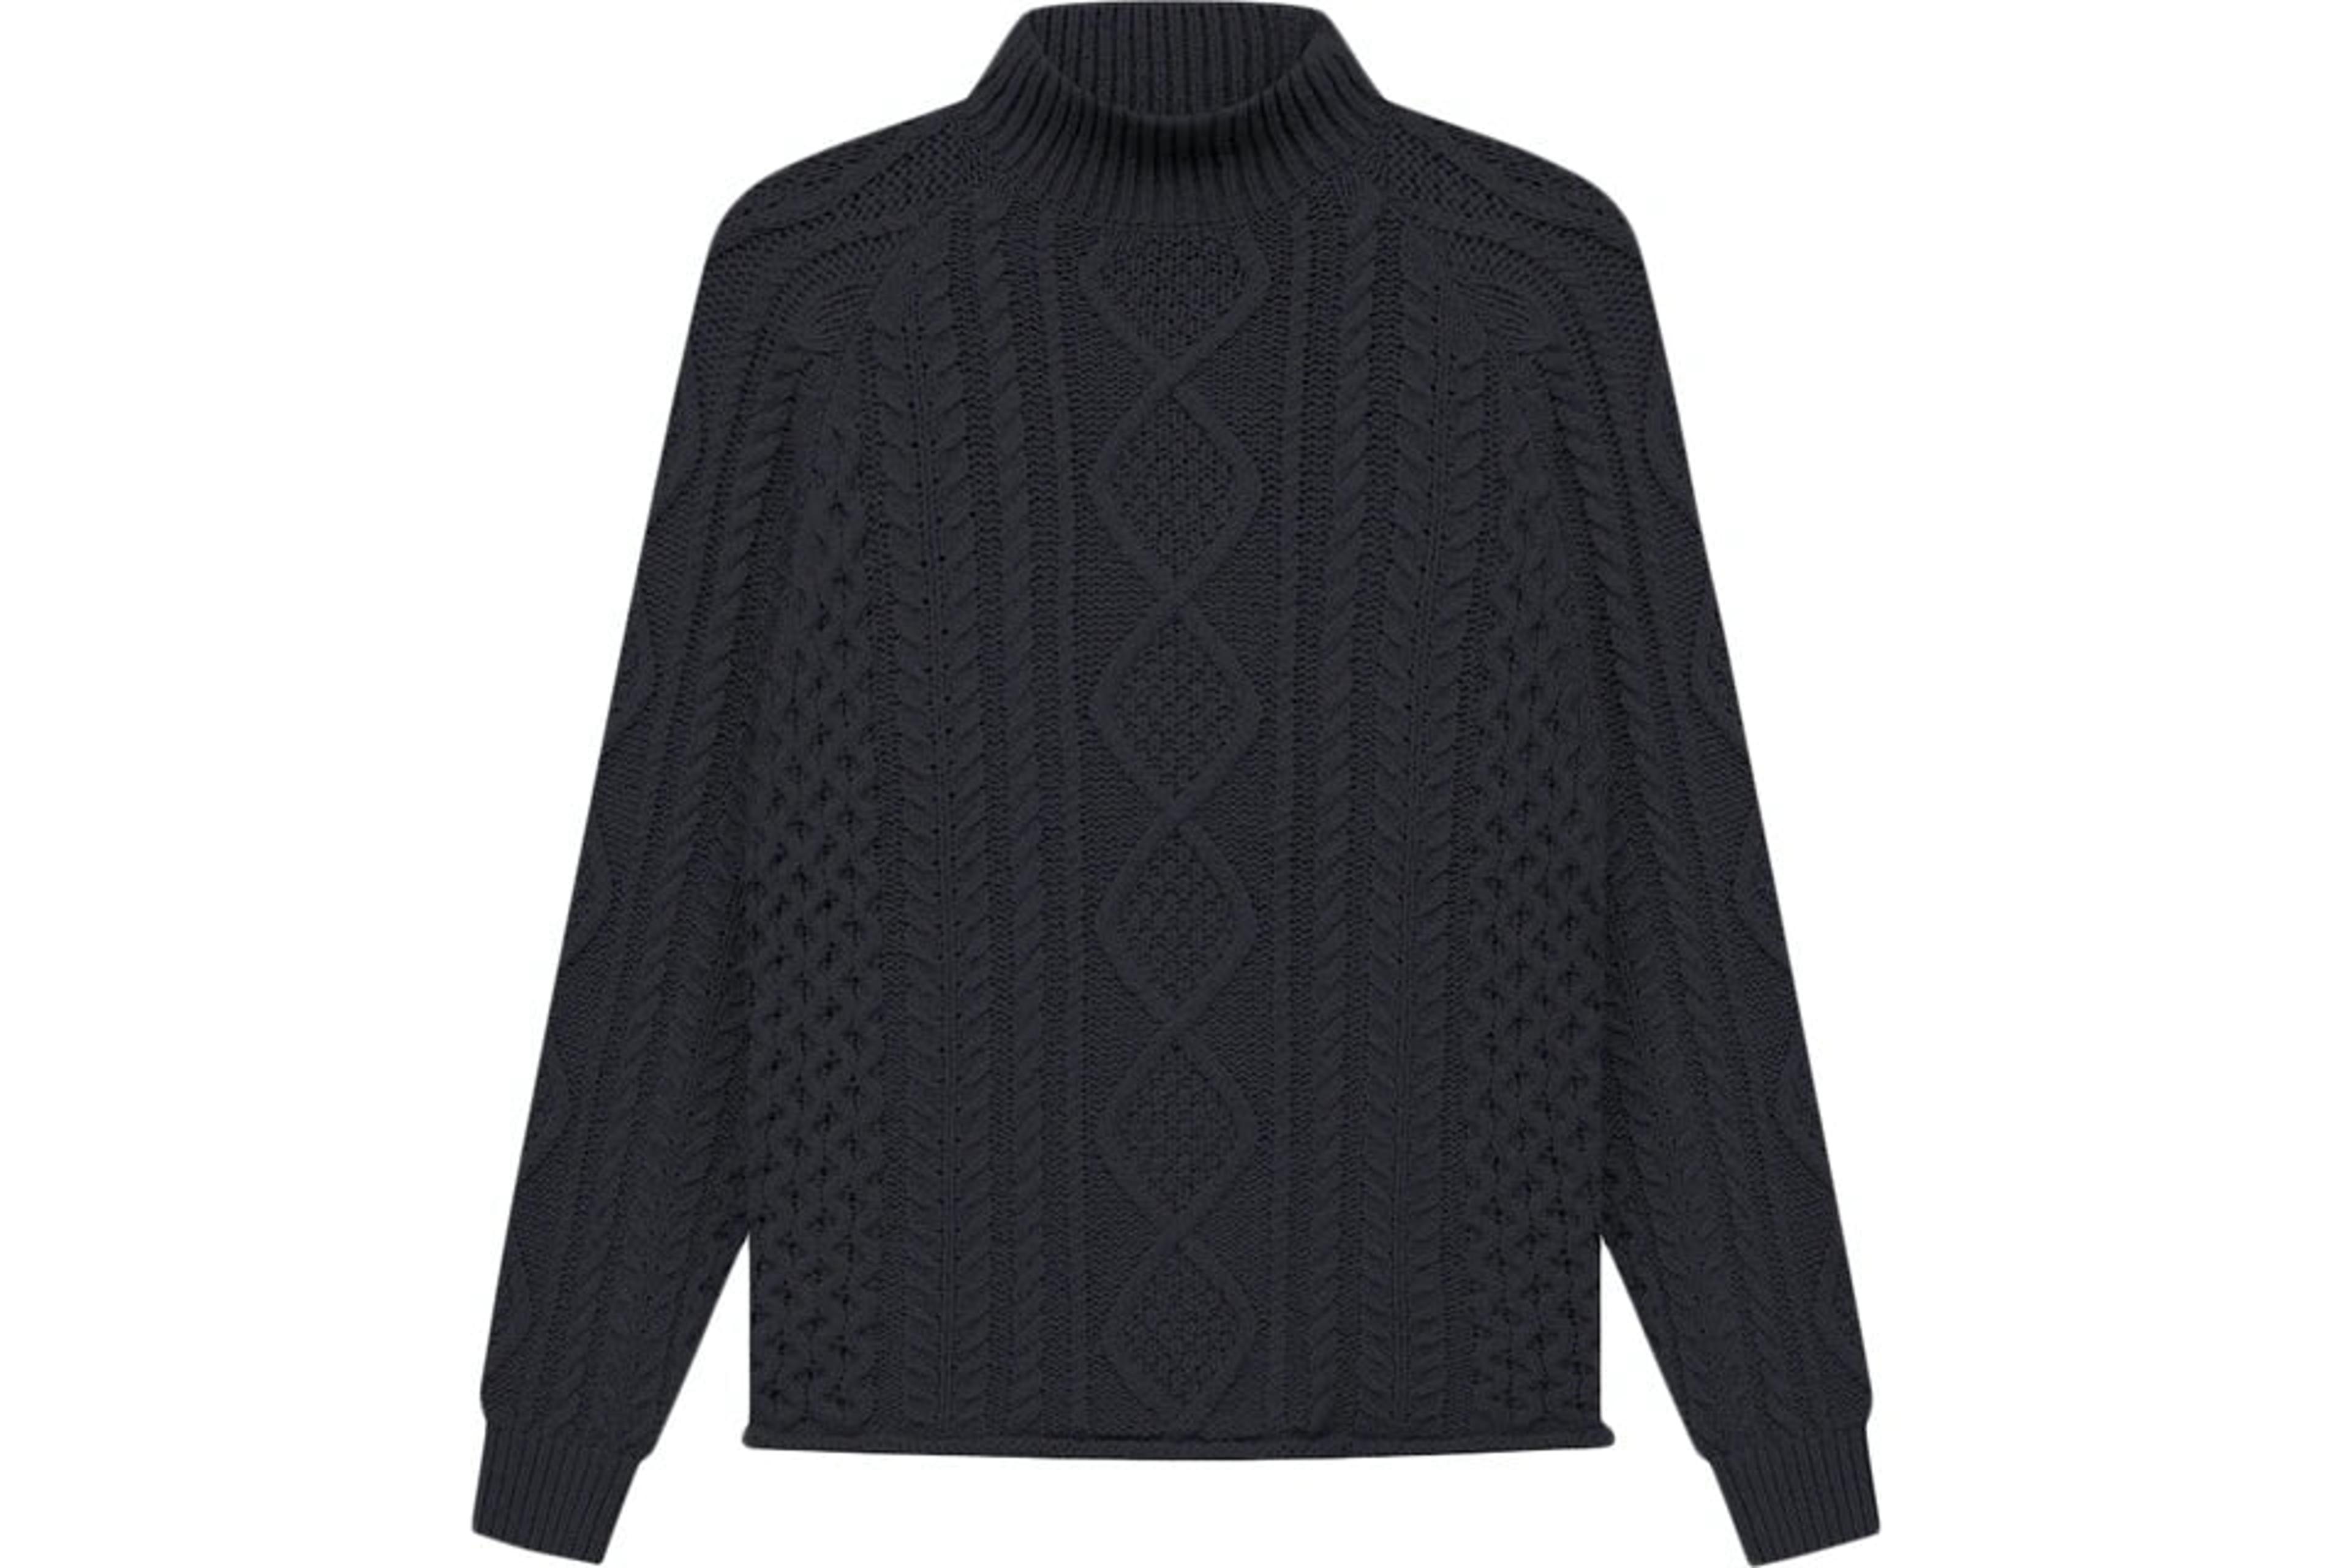 Fear of God Essentials Cable Knit Turtleneck Iron